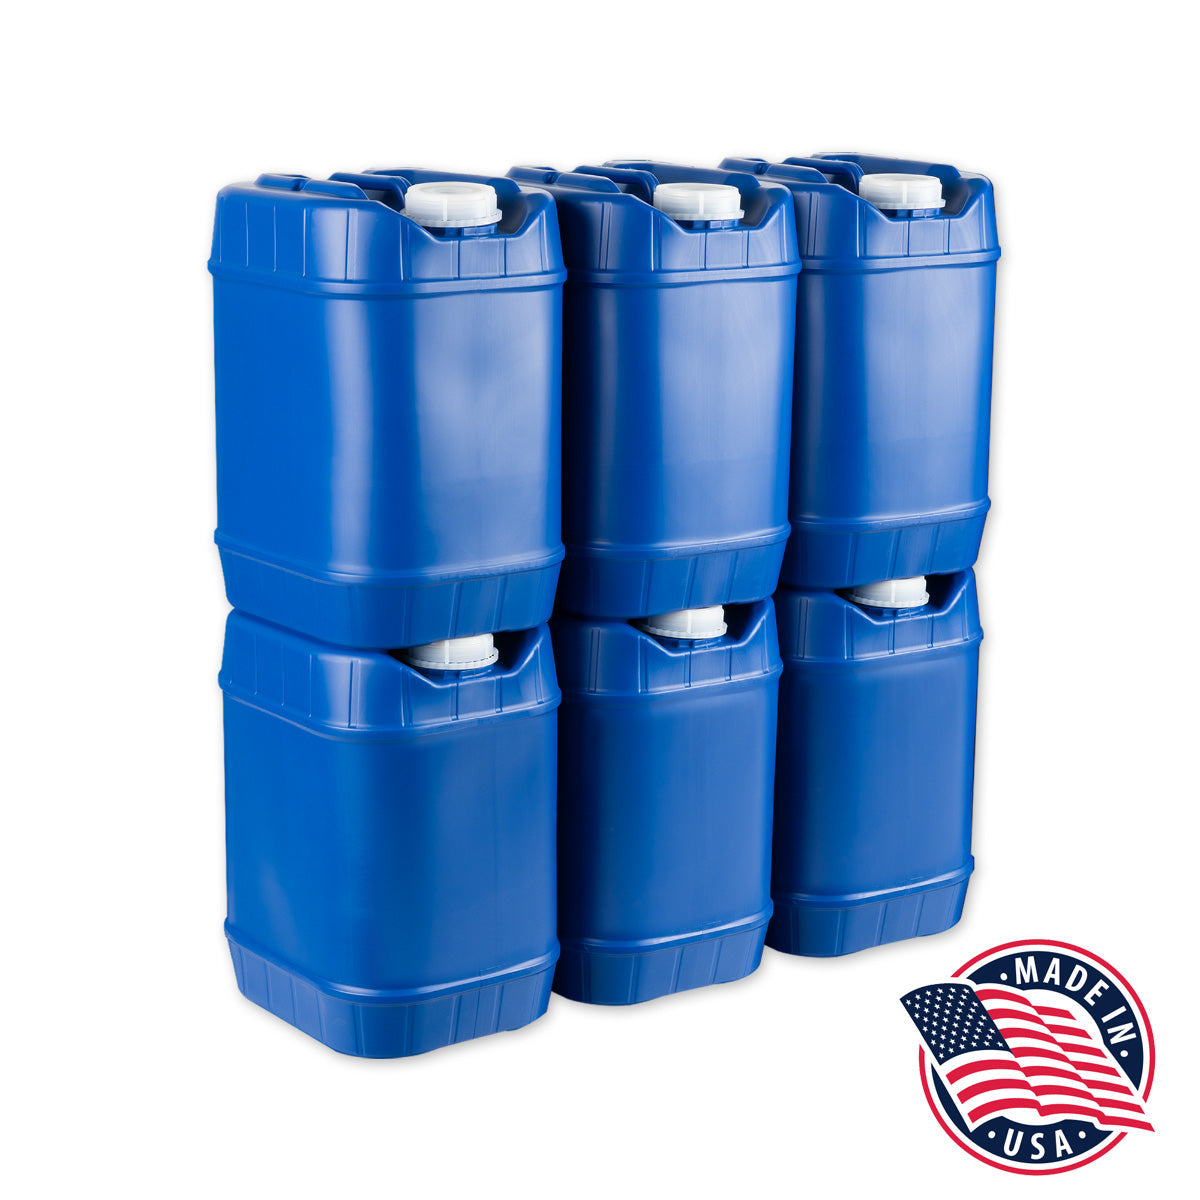 30 gallon pack emergency water storage containers